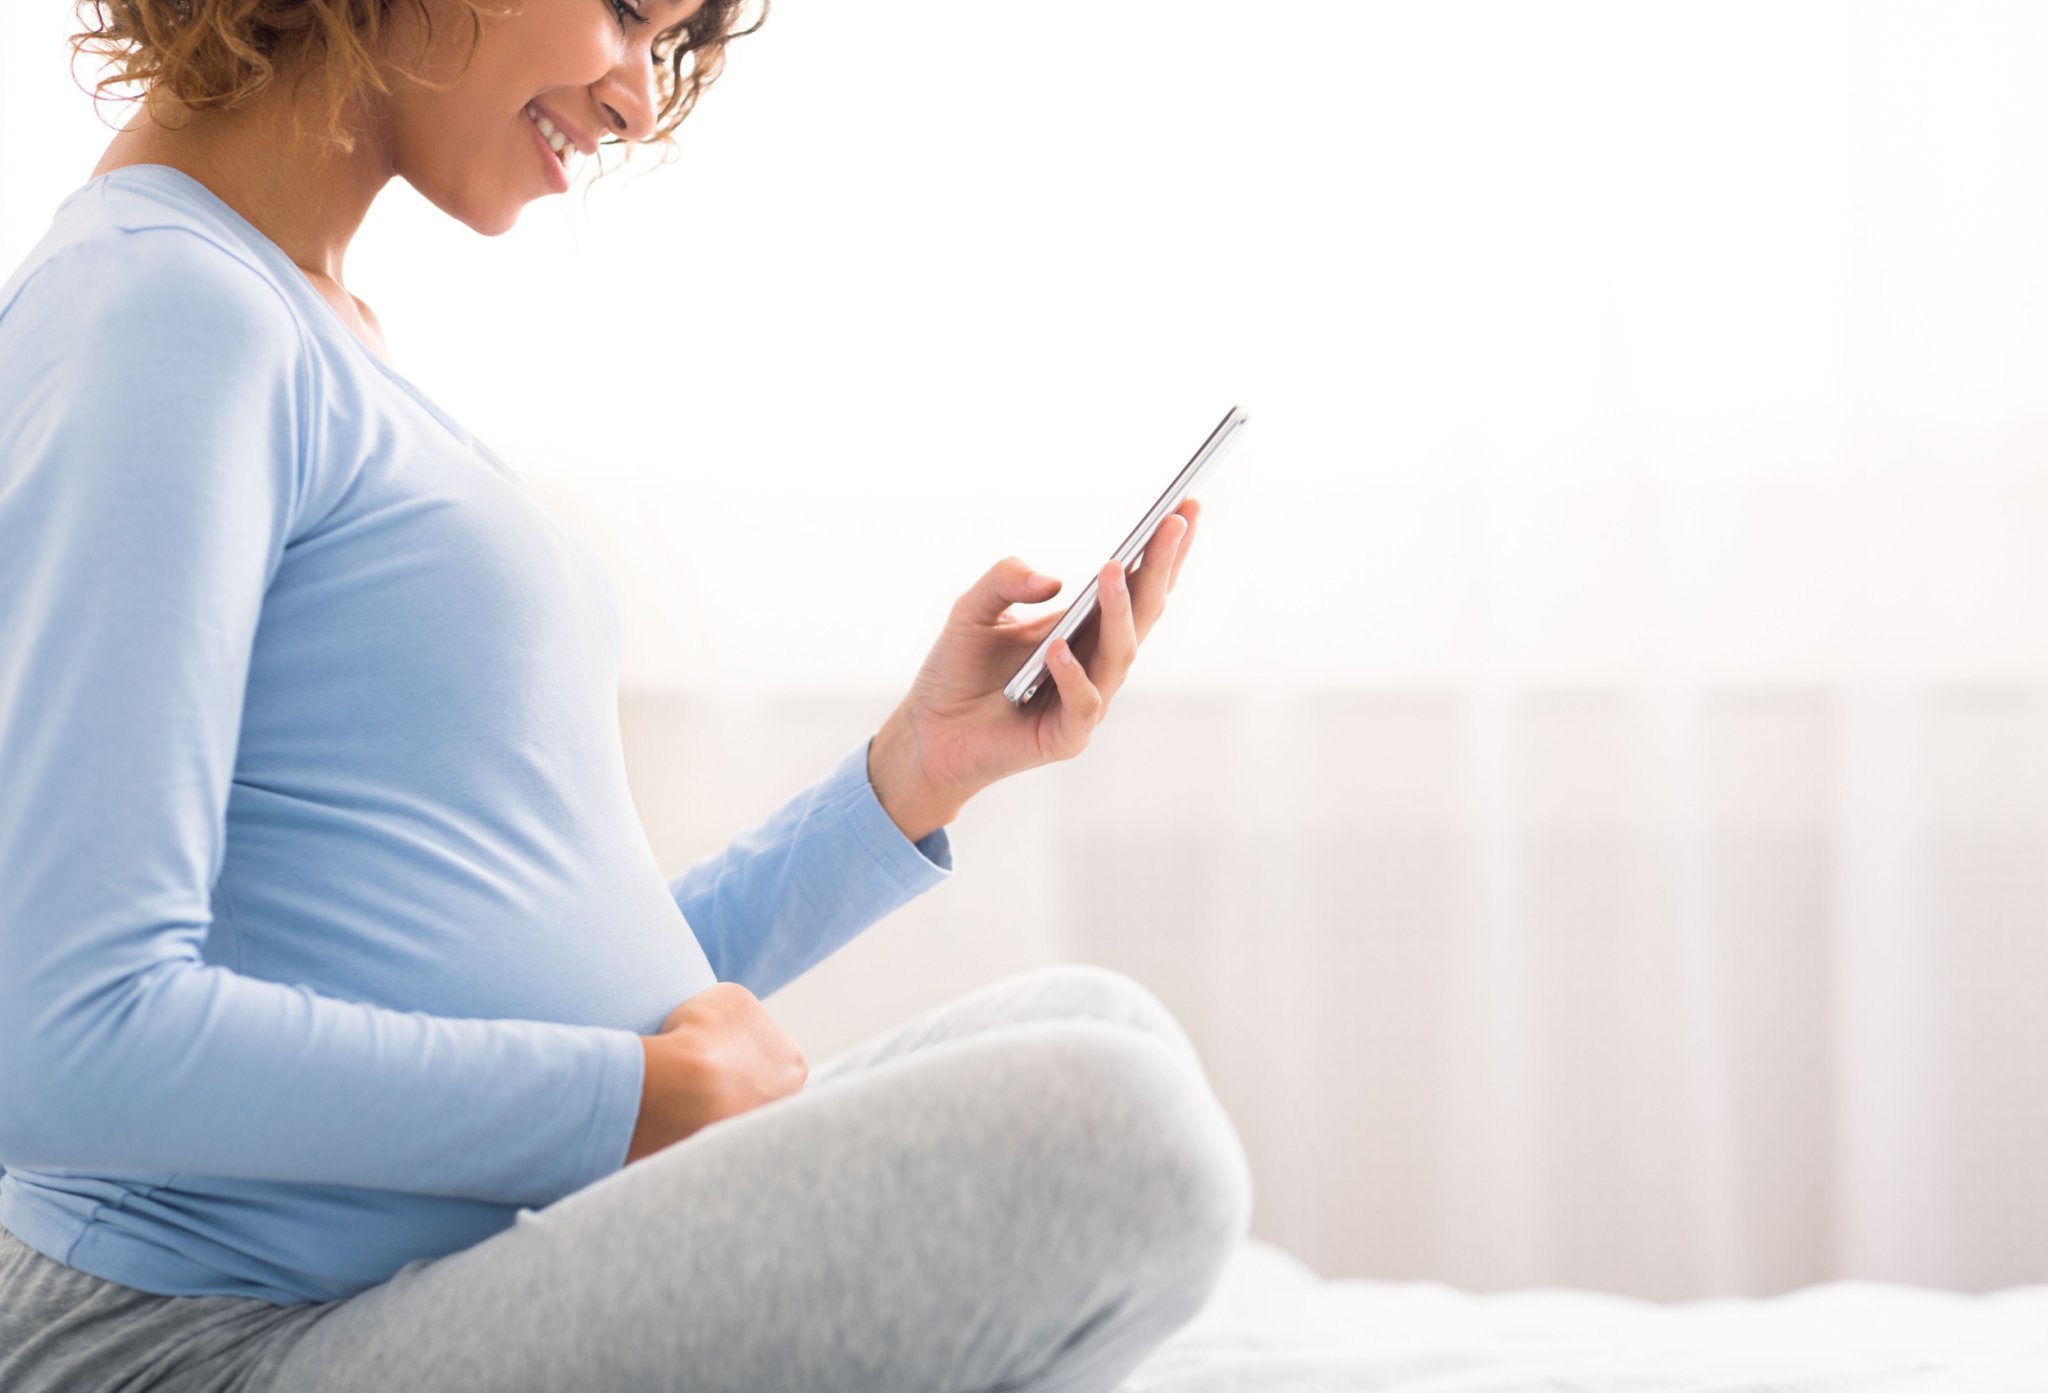 Apps That Can Lend New Parents a Helping Hand